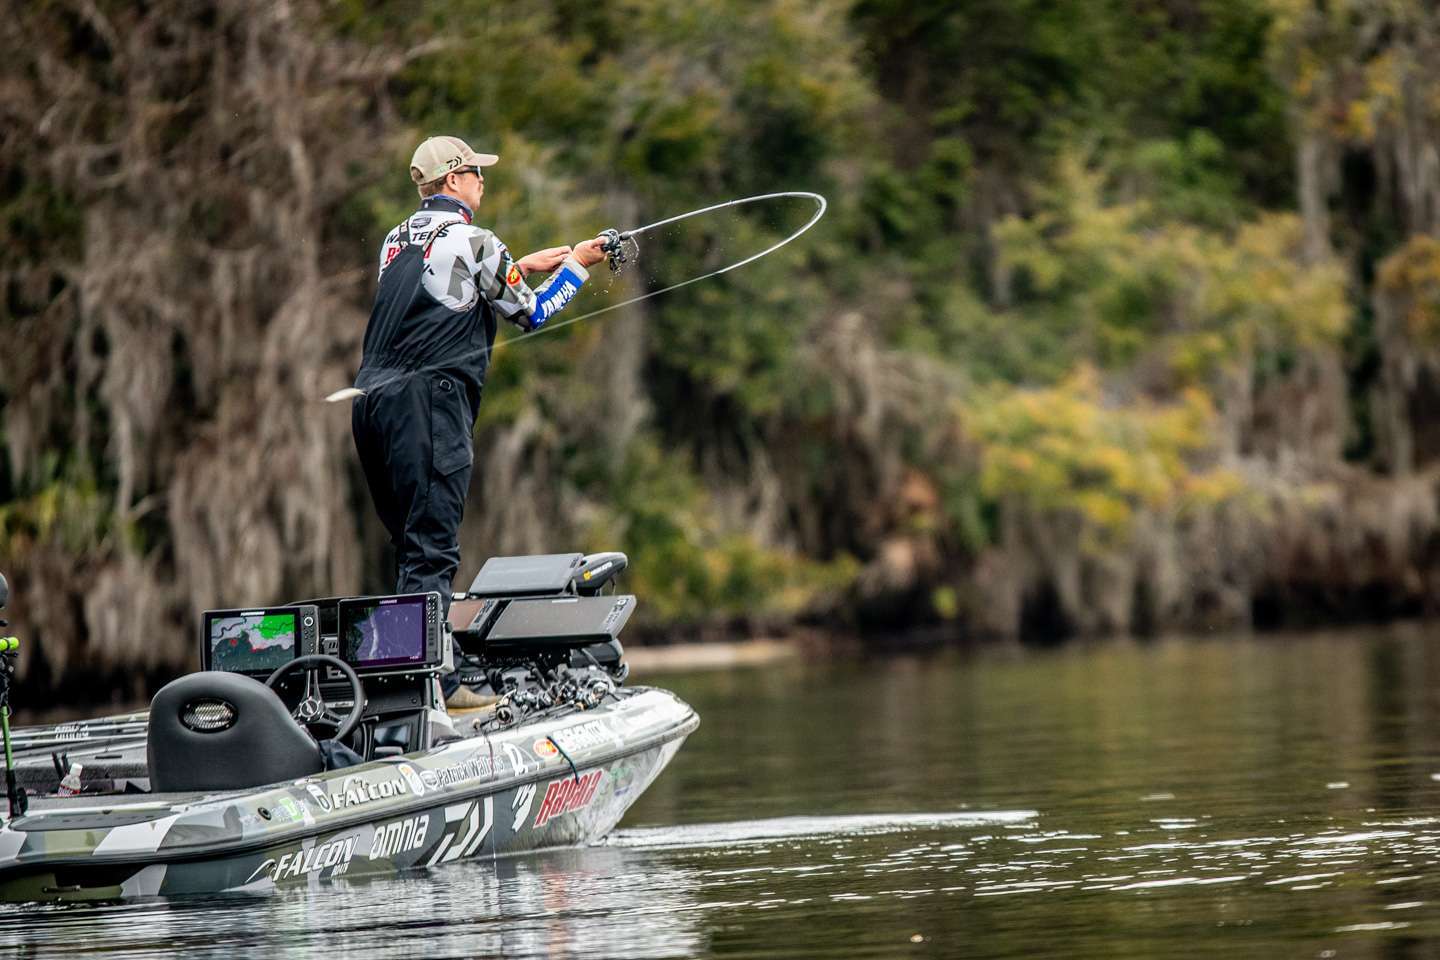 

<p>It takes a mixed bag of baits to intercept prespawn bass on the move. The top anglers at St. Johns River proved it, opting for topwaters, jerkbaits, bladed jigs and a wide assortment of soft plastics rigged to cover the varying conditions. You can find everything you need for the spawning season at <a href=